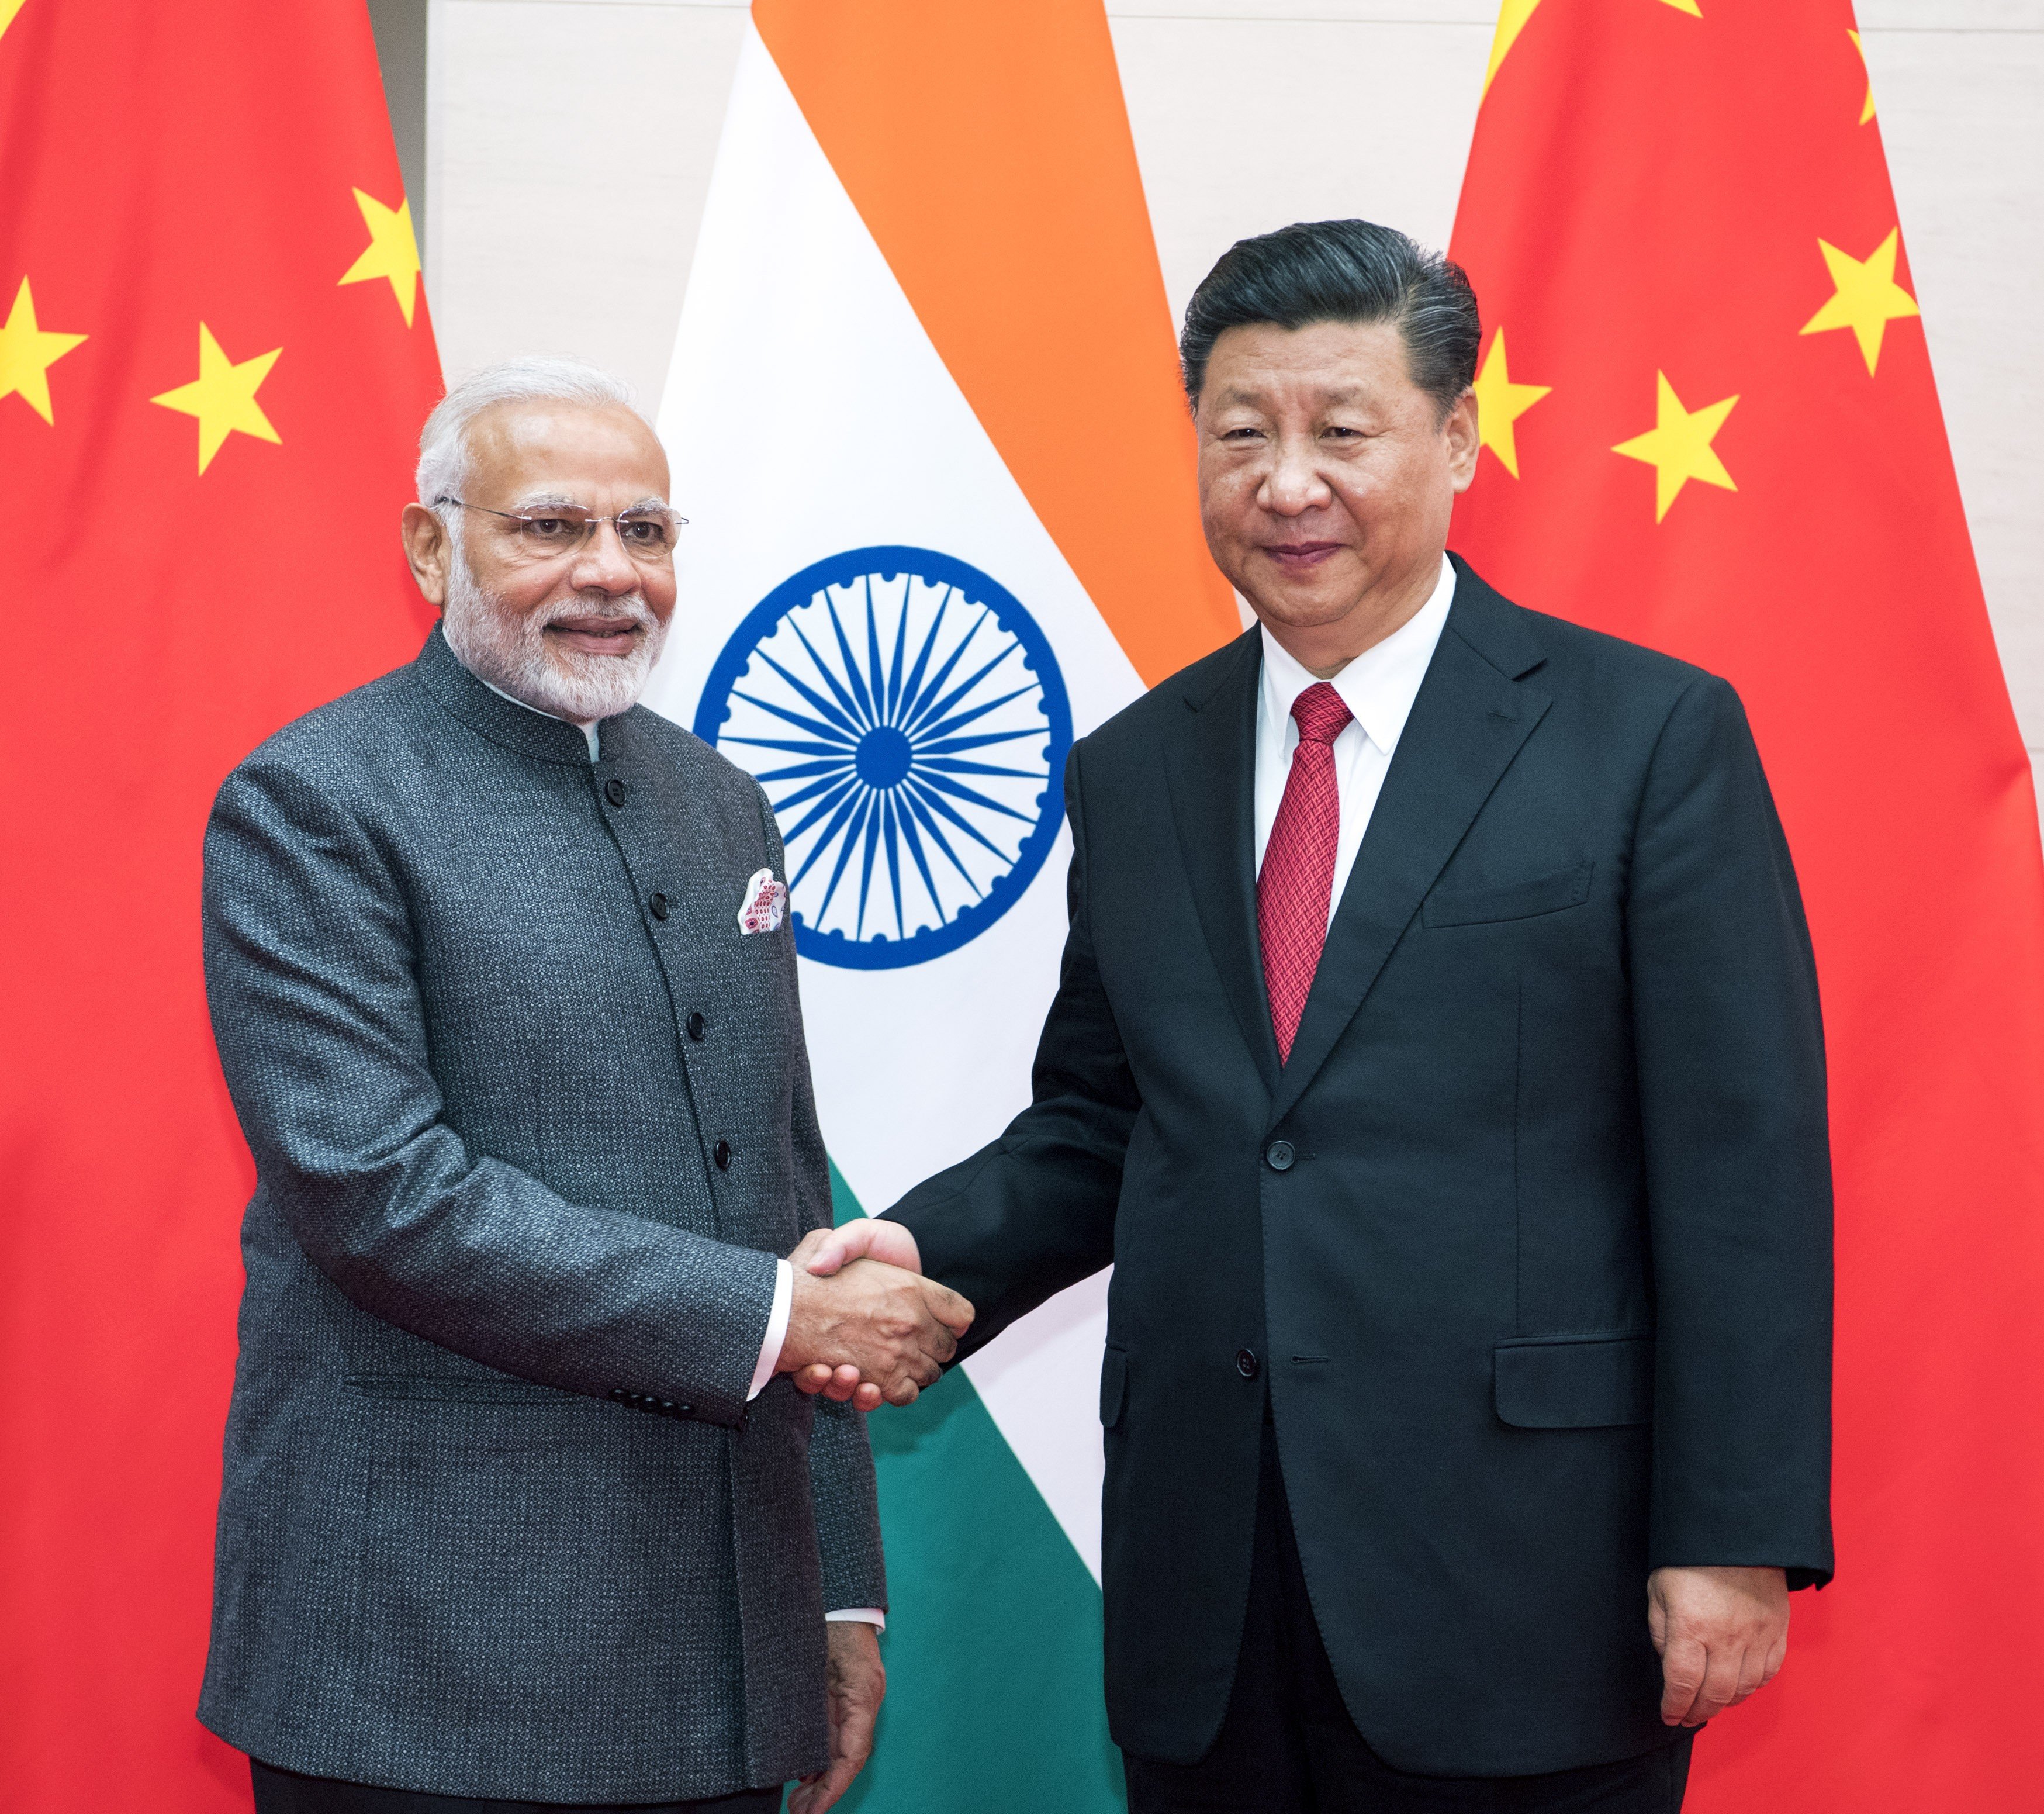 Indian Prime Minister Narendra Modi meets Chinese President Xi Jinping at the Shanghai Cooperation Organisation summit in Qingdao, in east China's Shandong province, on June 9, 2018. Photo: Xinhua